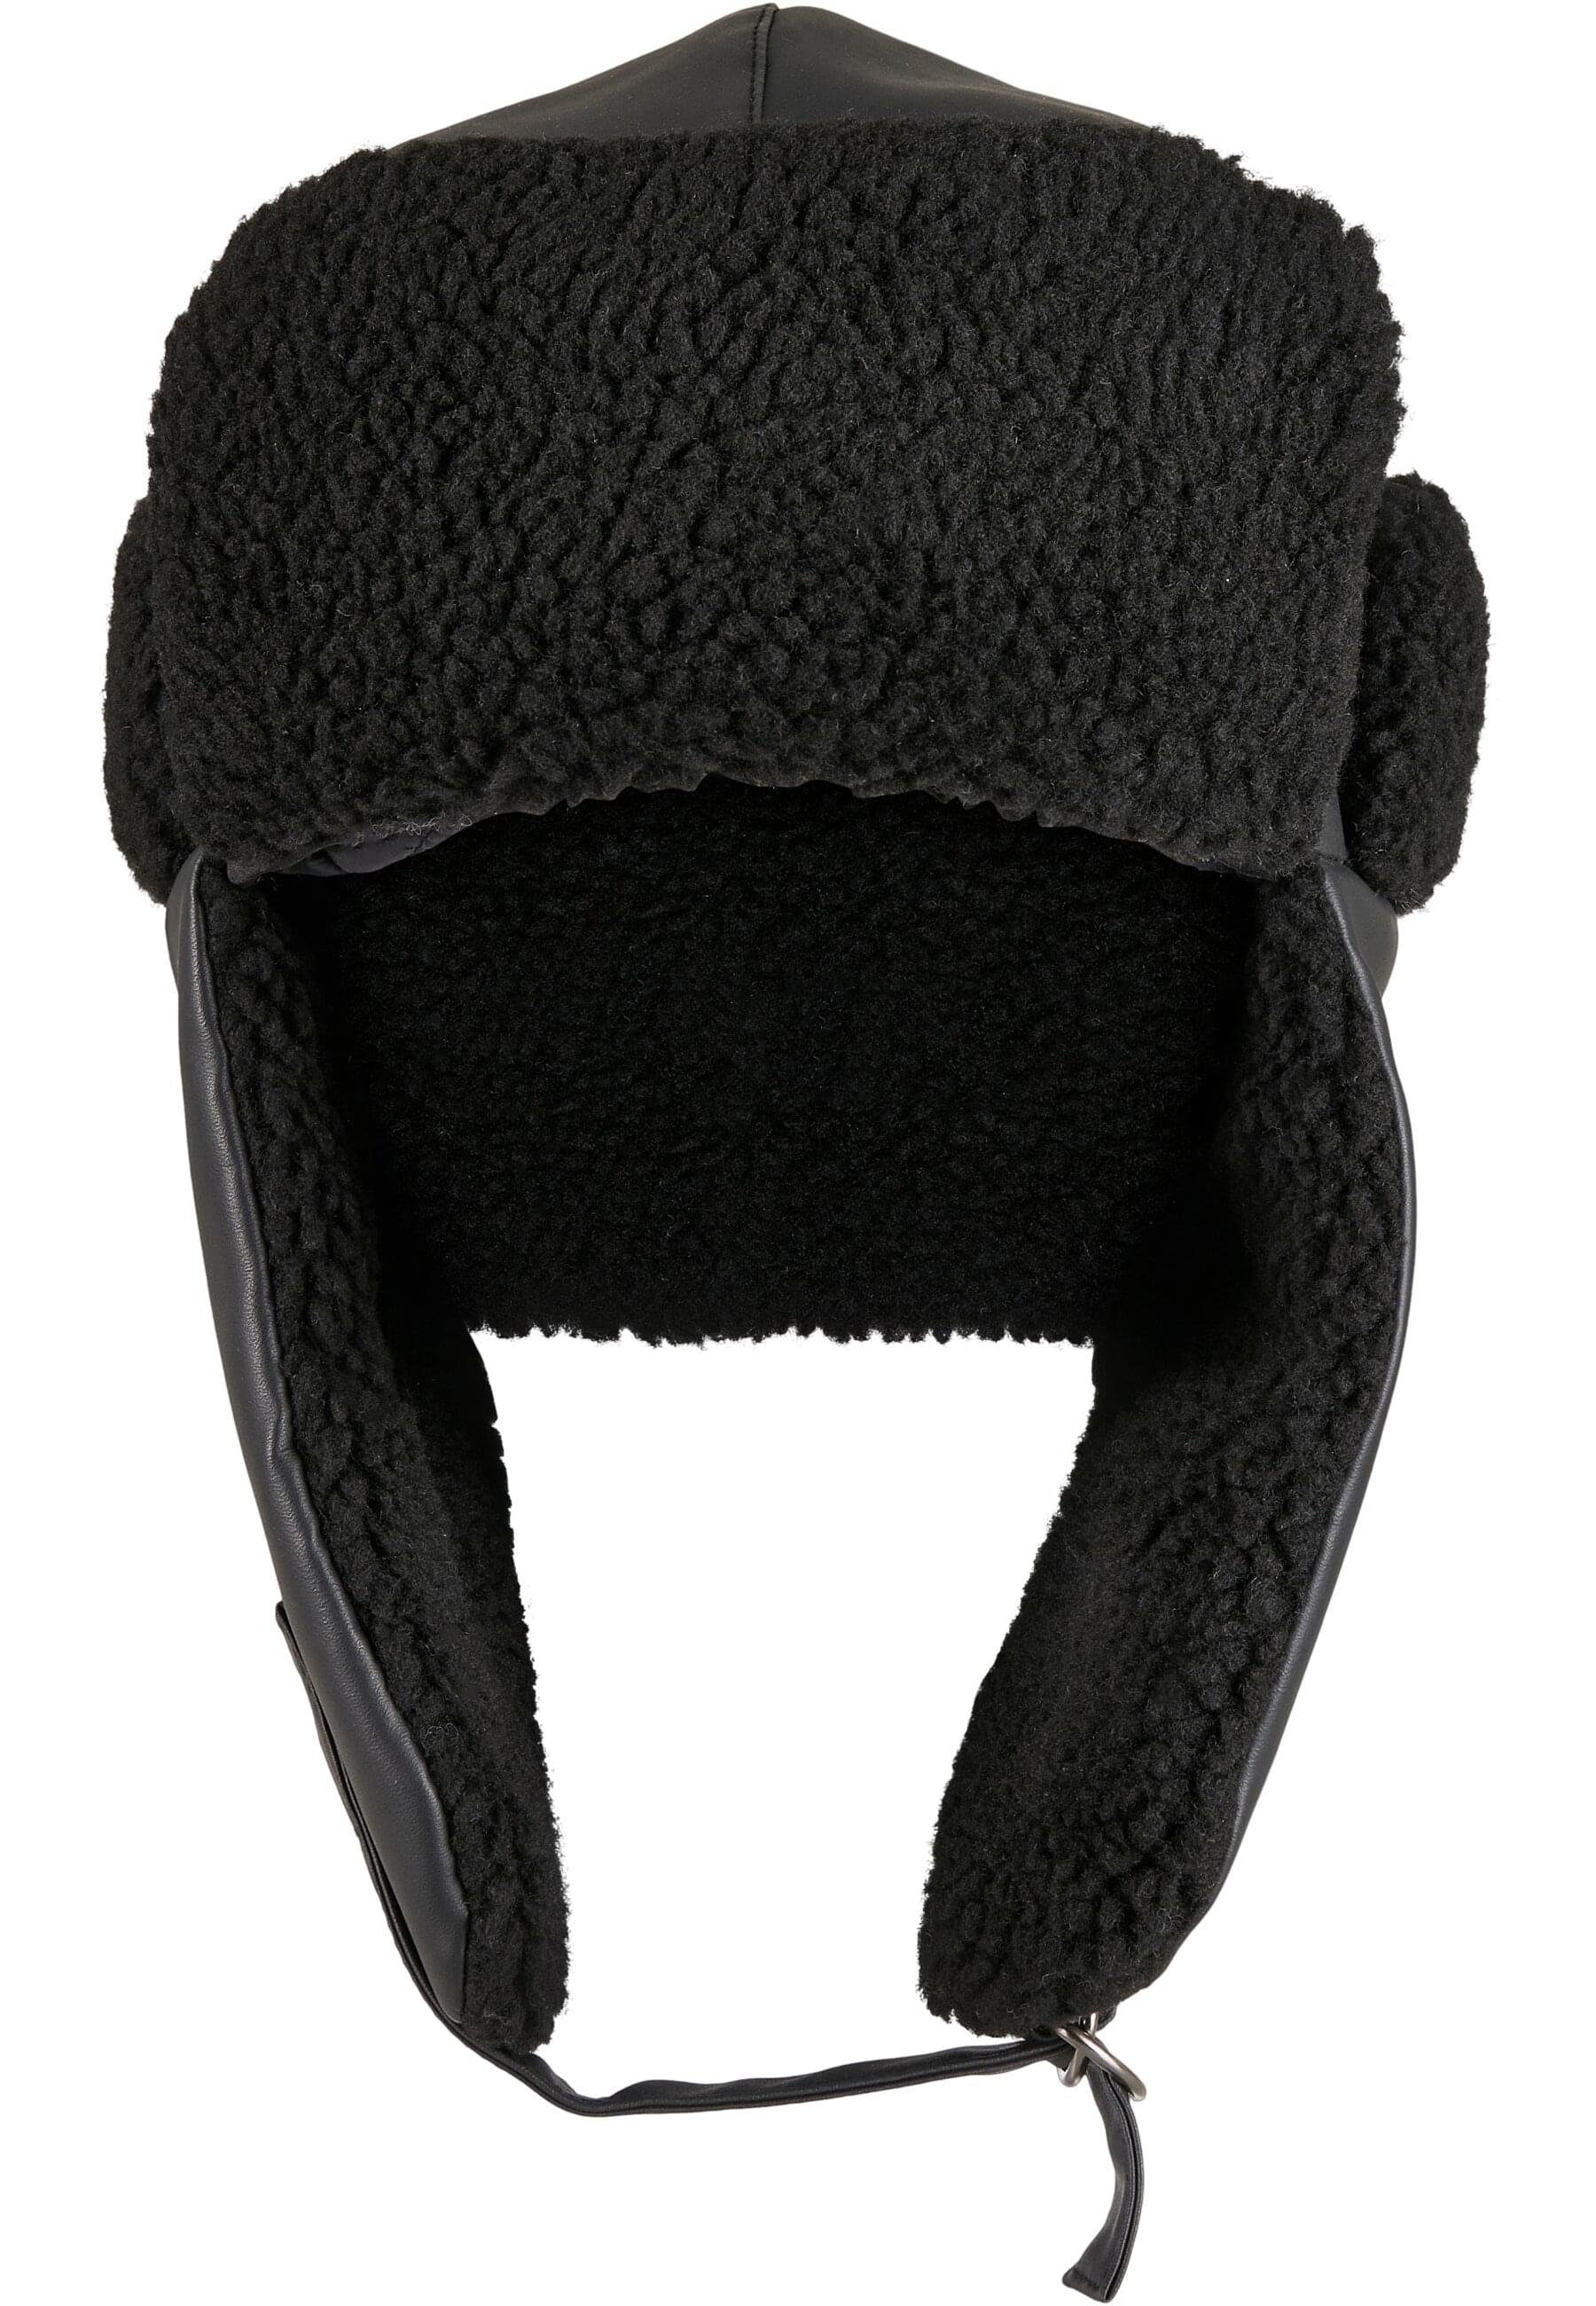 URBAN CLASSICS Beanie Unisex Synthetic Leather Trapper Hat (1-St)